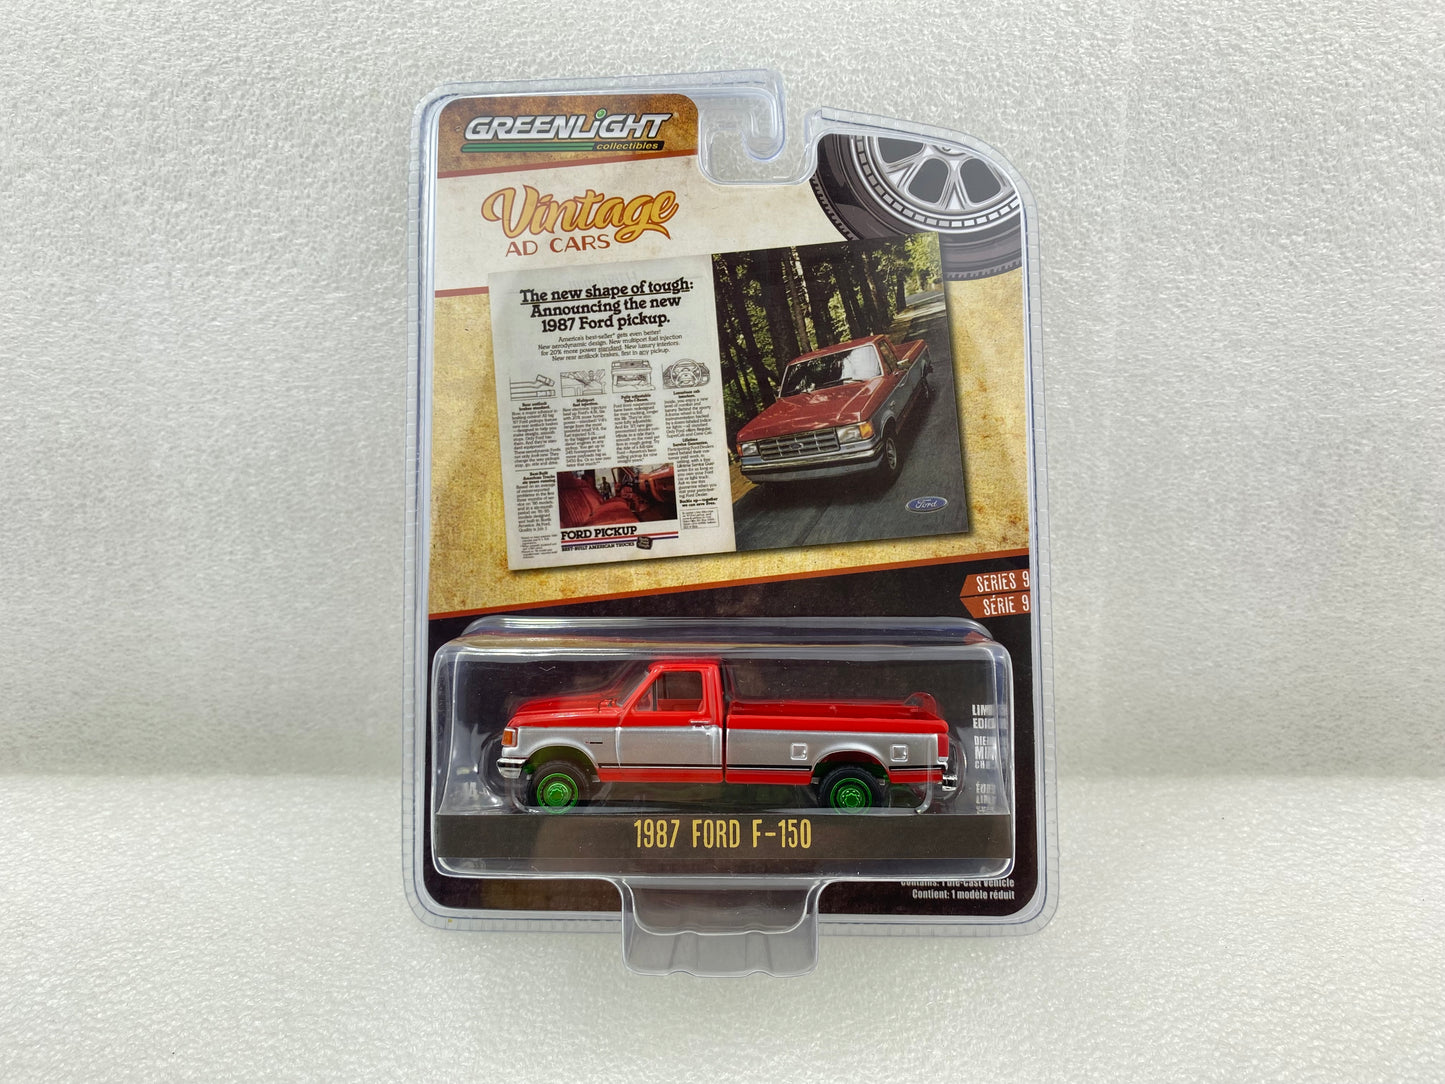 GreenLight Green Machine 1:64 Vintage Ad Cars Series 9 - 1987 Ford F-150 “The New Shape Of Tough” 39130-F